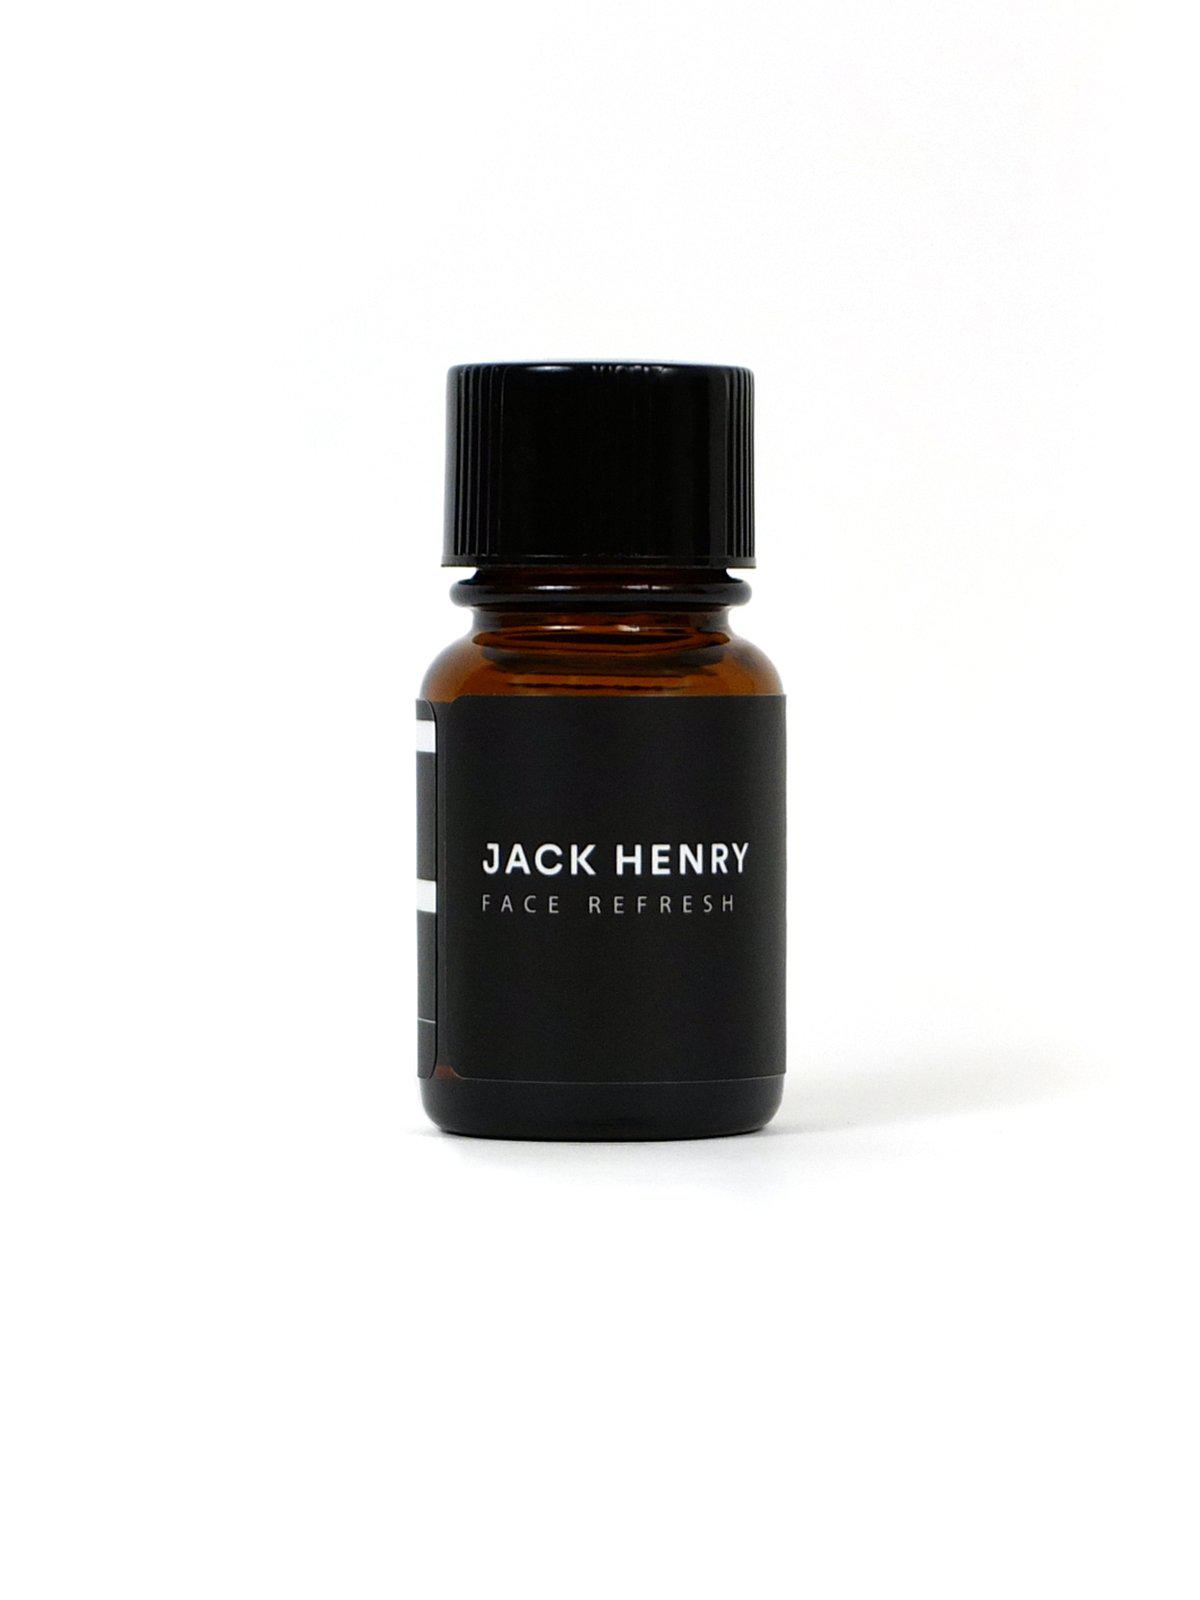 Jack Henry Face Refresh 1oz - MORE by Morello Indonesia